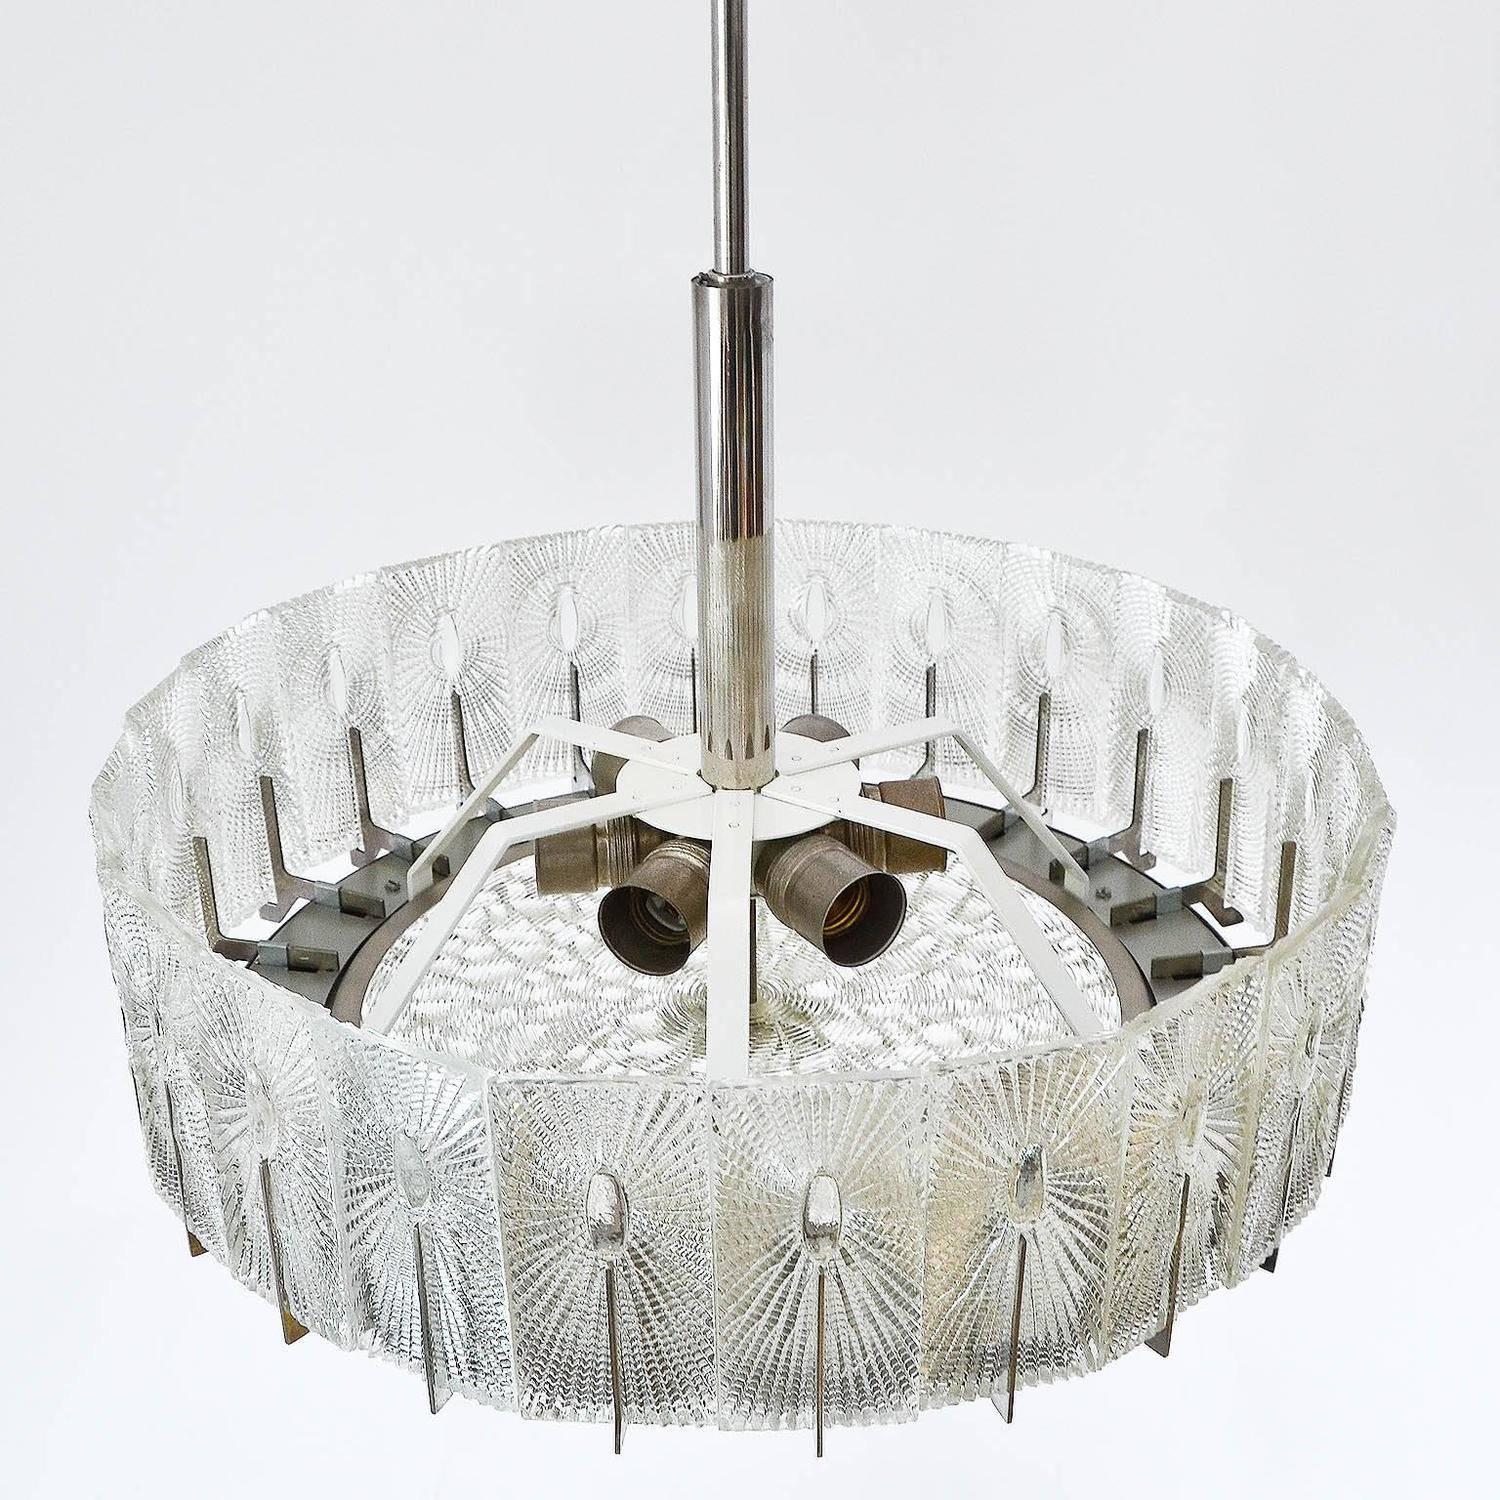 Austrian Chandelier by Rupert Nikoll, Textured Glass and Nickel, 1960 For Sale